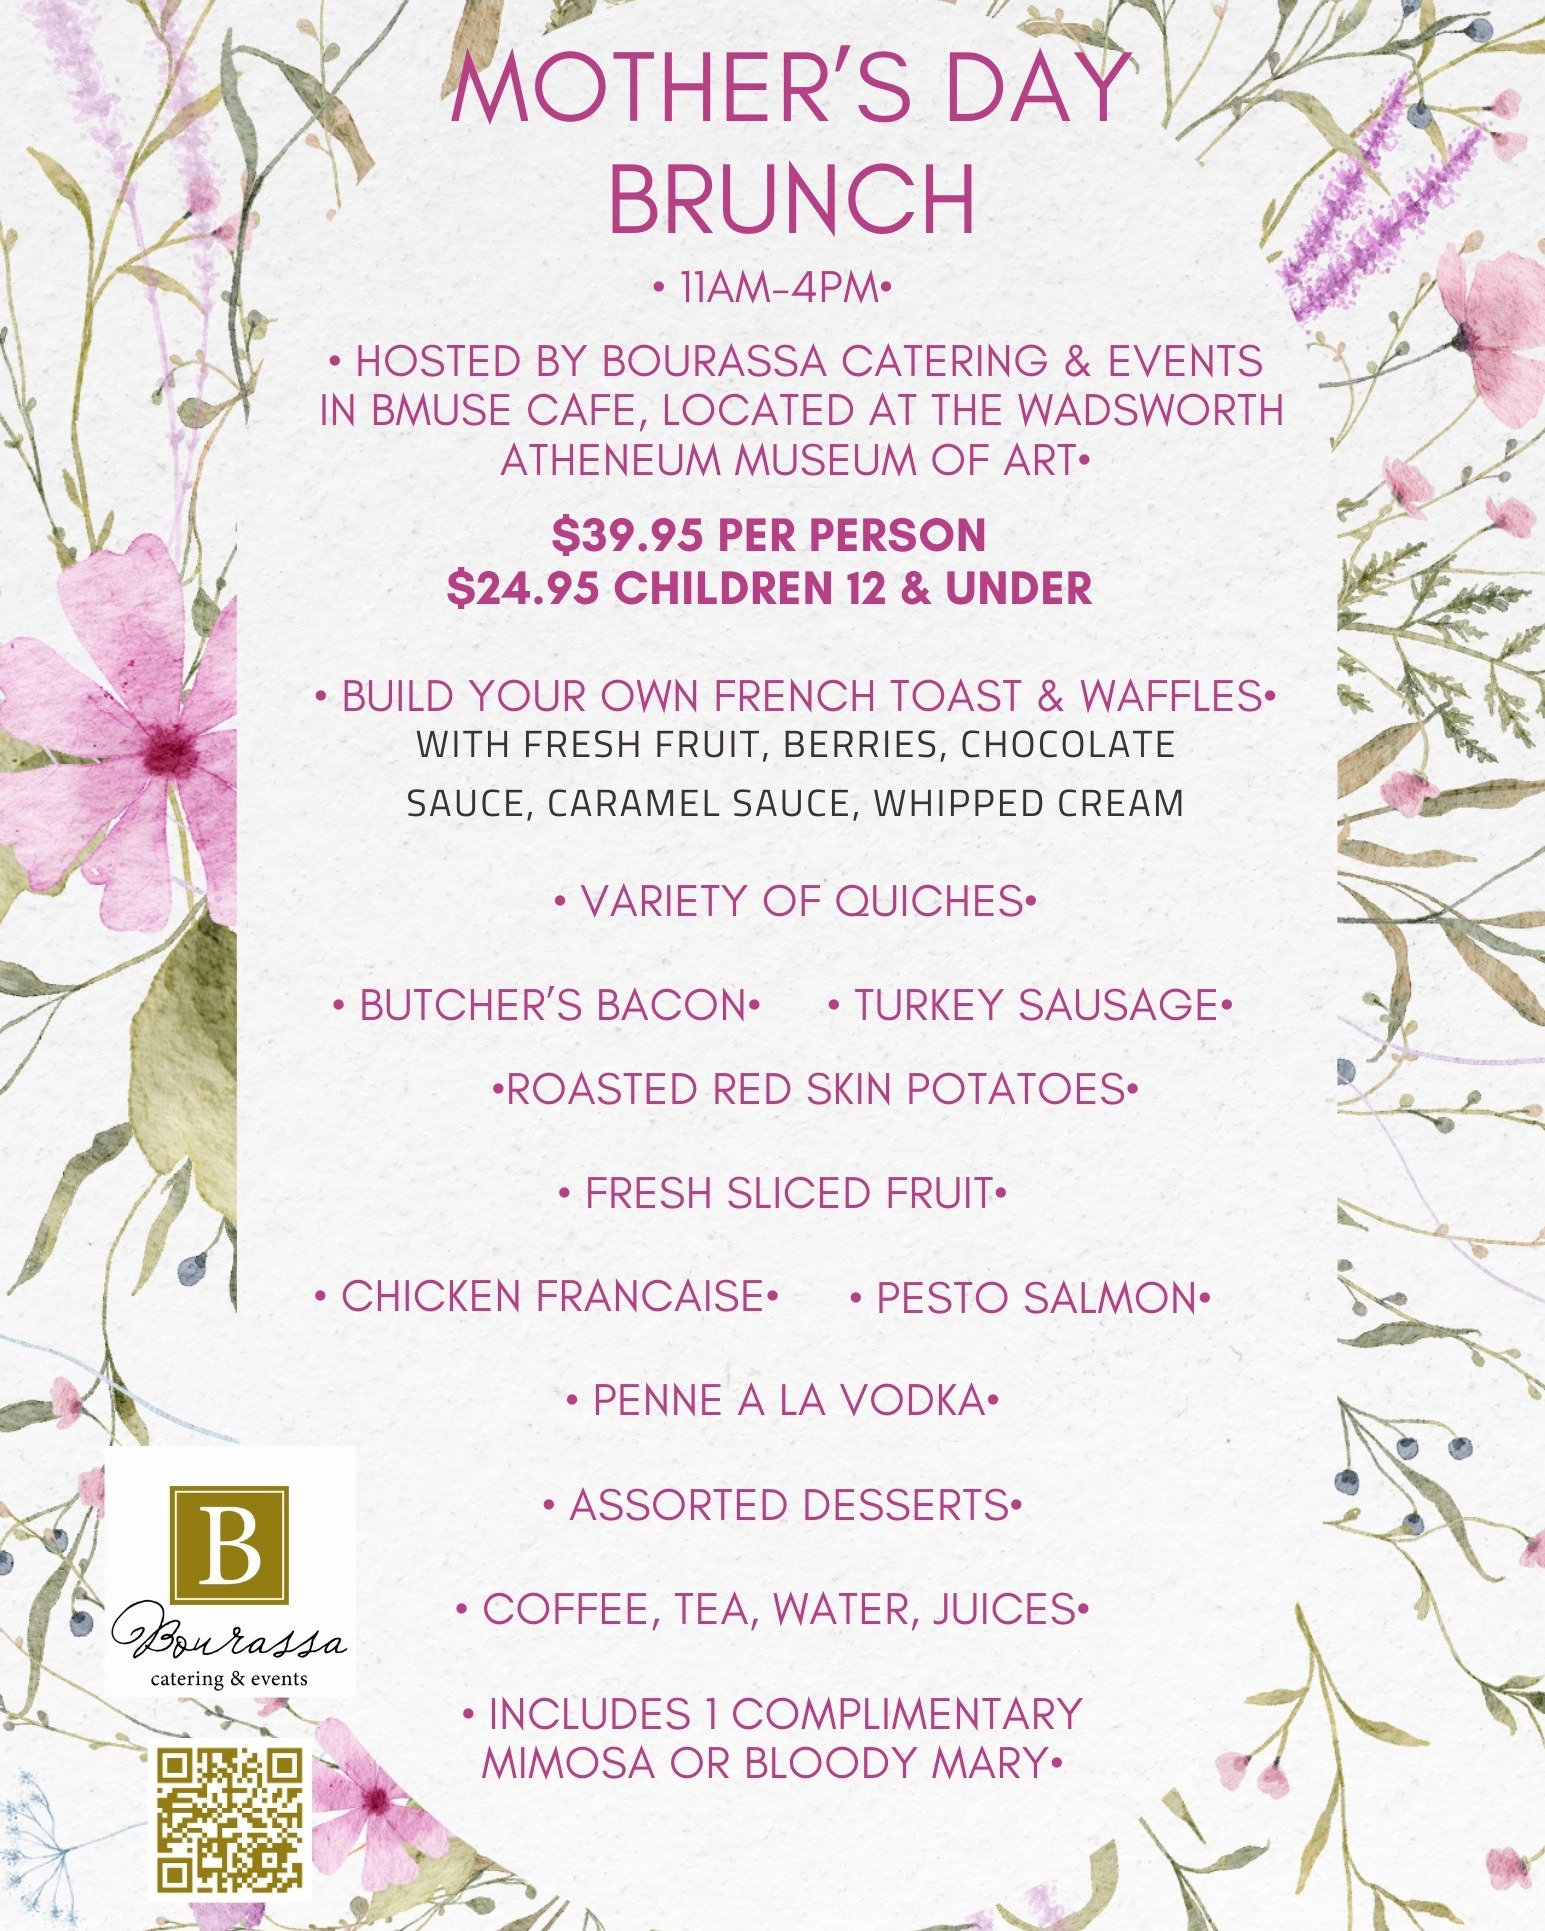 Come celebrate MOM!  Sunday from 11-4 at @bmusecafe.hartford located in the @thewadsworth for a Mother's Day brunch buffet. Menu and pricing below.

And don't forget to grab tickets to join the @hgmcsing for its spring show!

#cheflife #foodie #boura